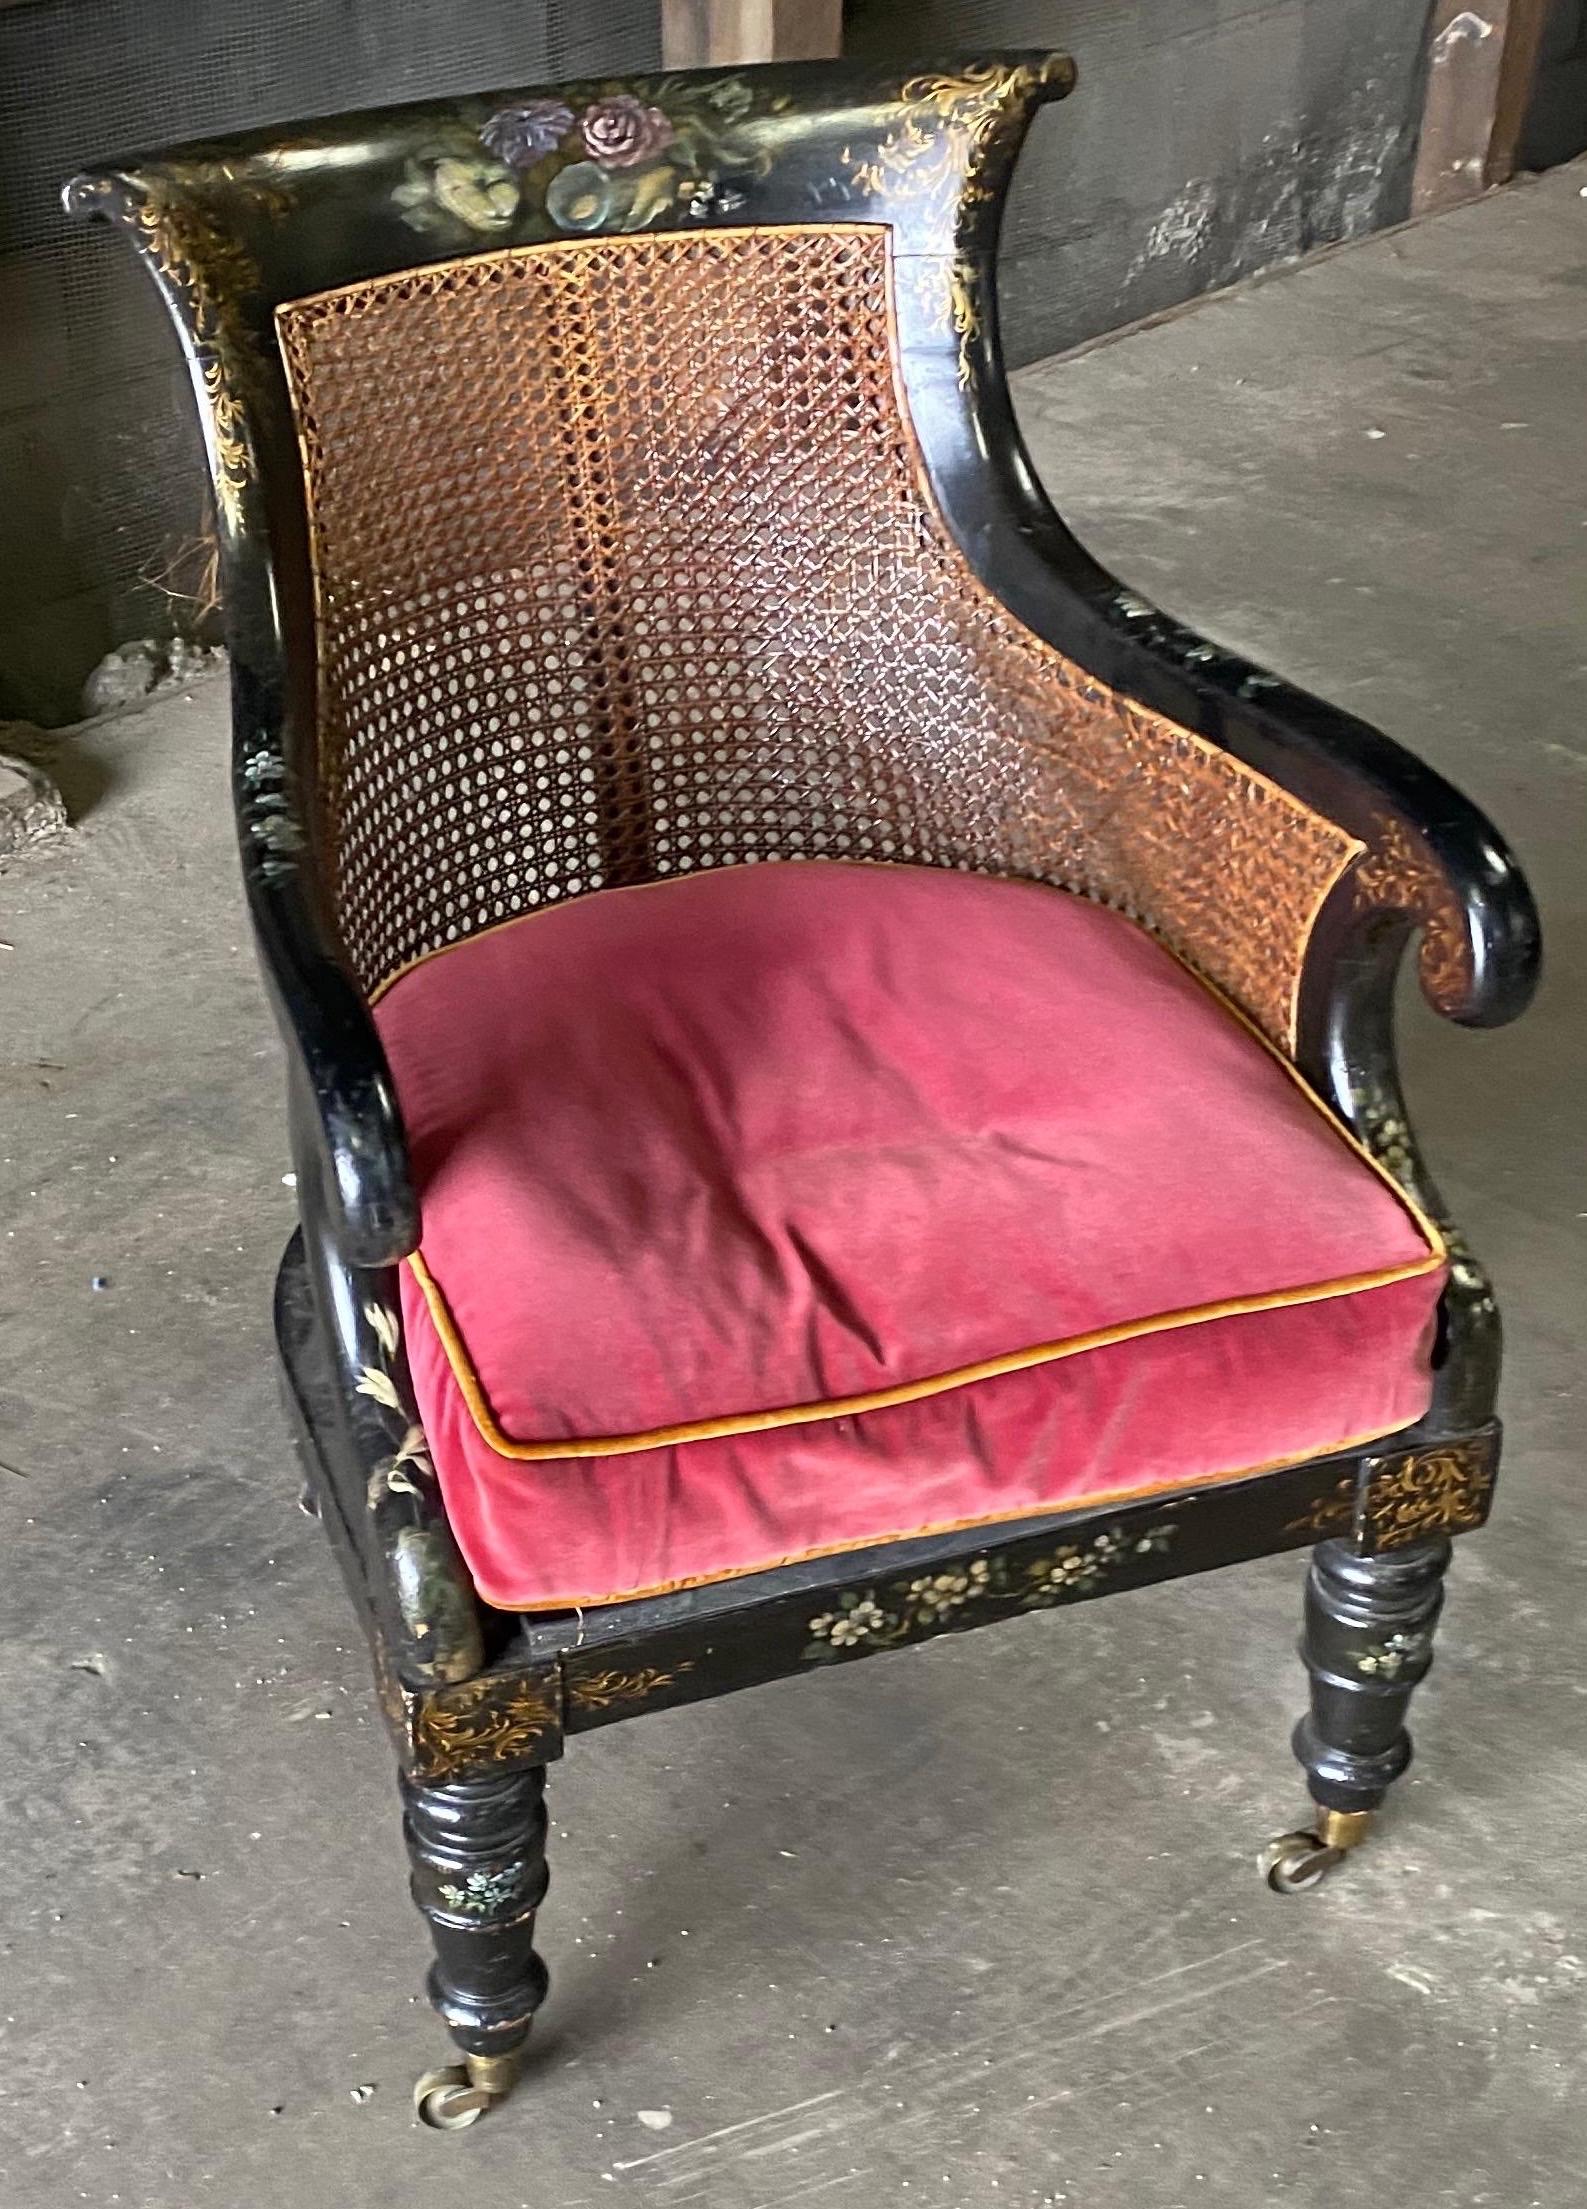 library chair for sale